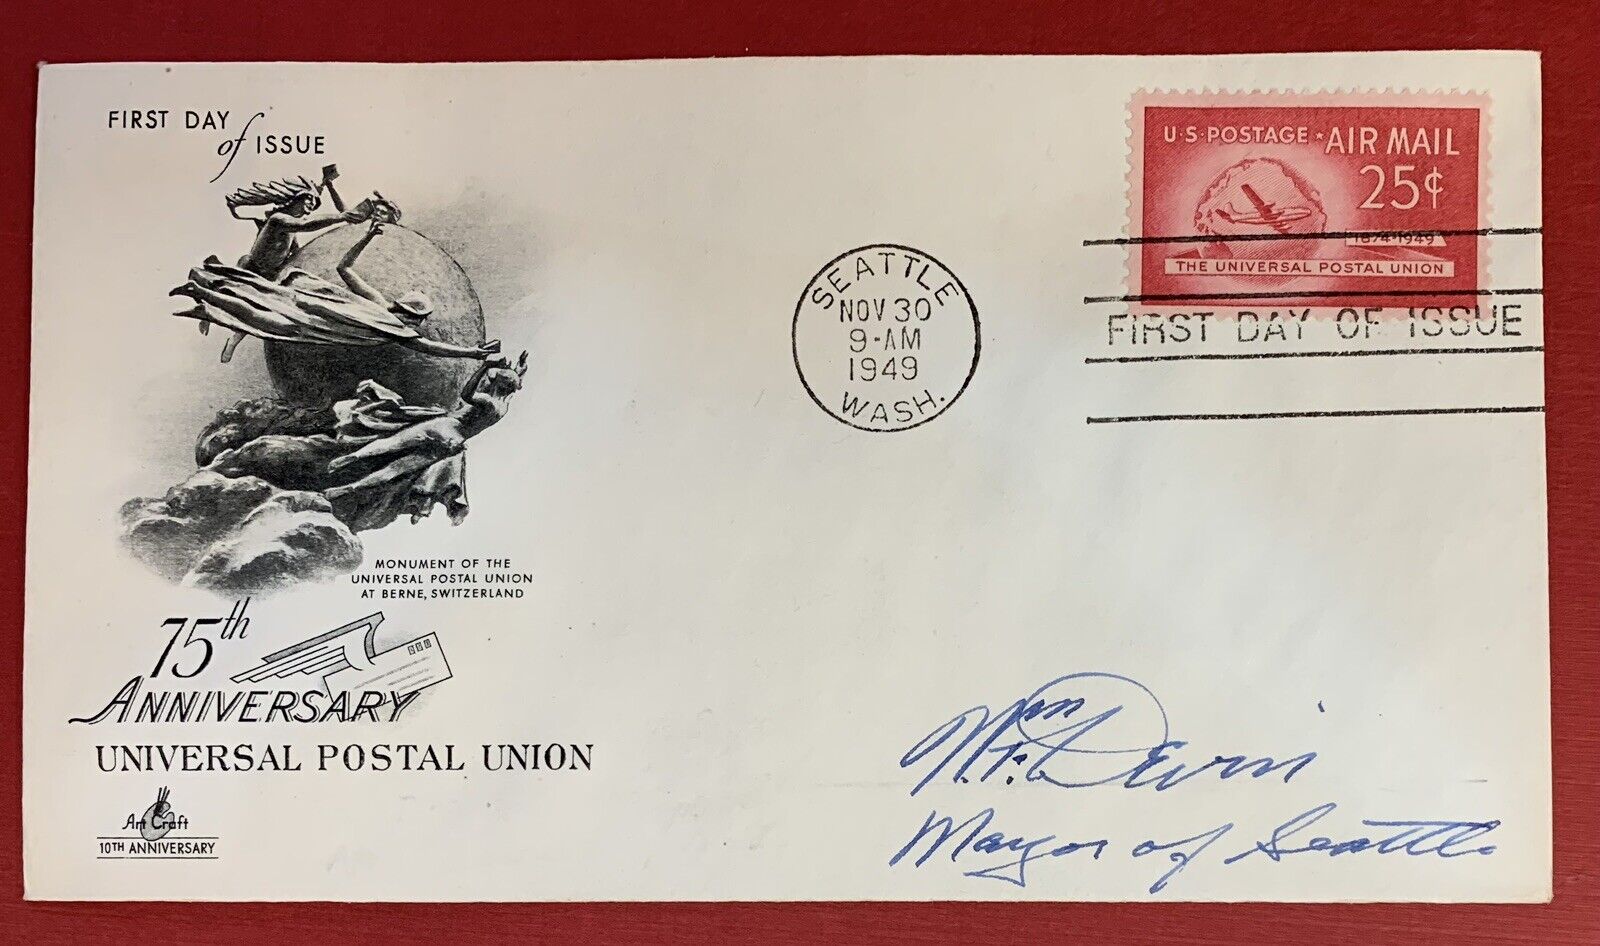 William F. Devin, Mayor of Seattle, Autograph on Scott #C44 First Day Cover